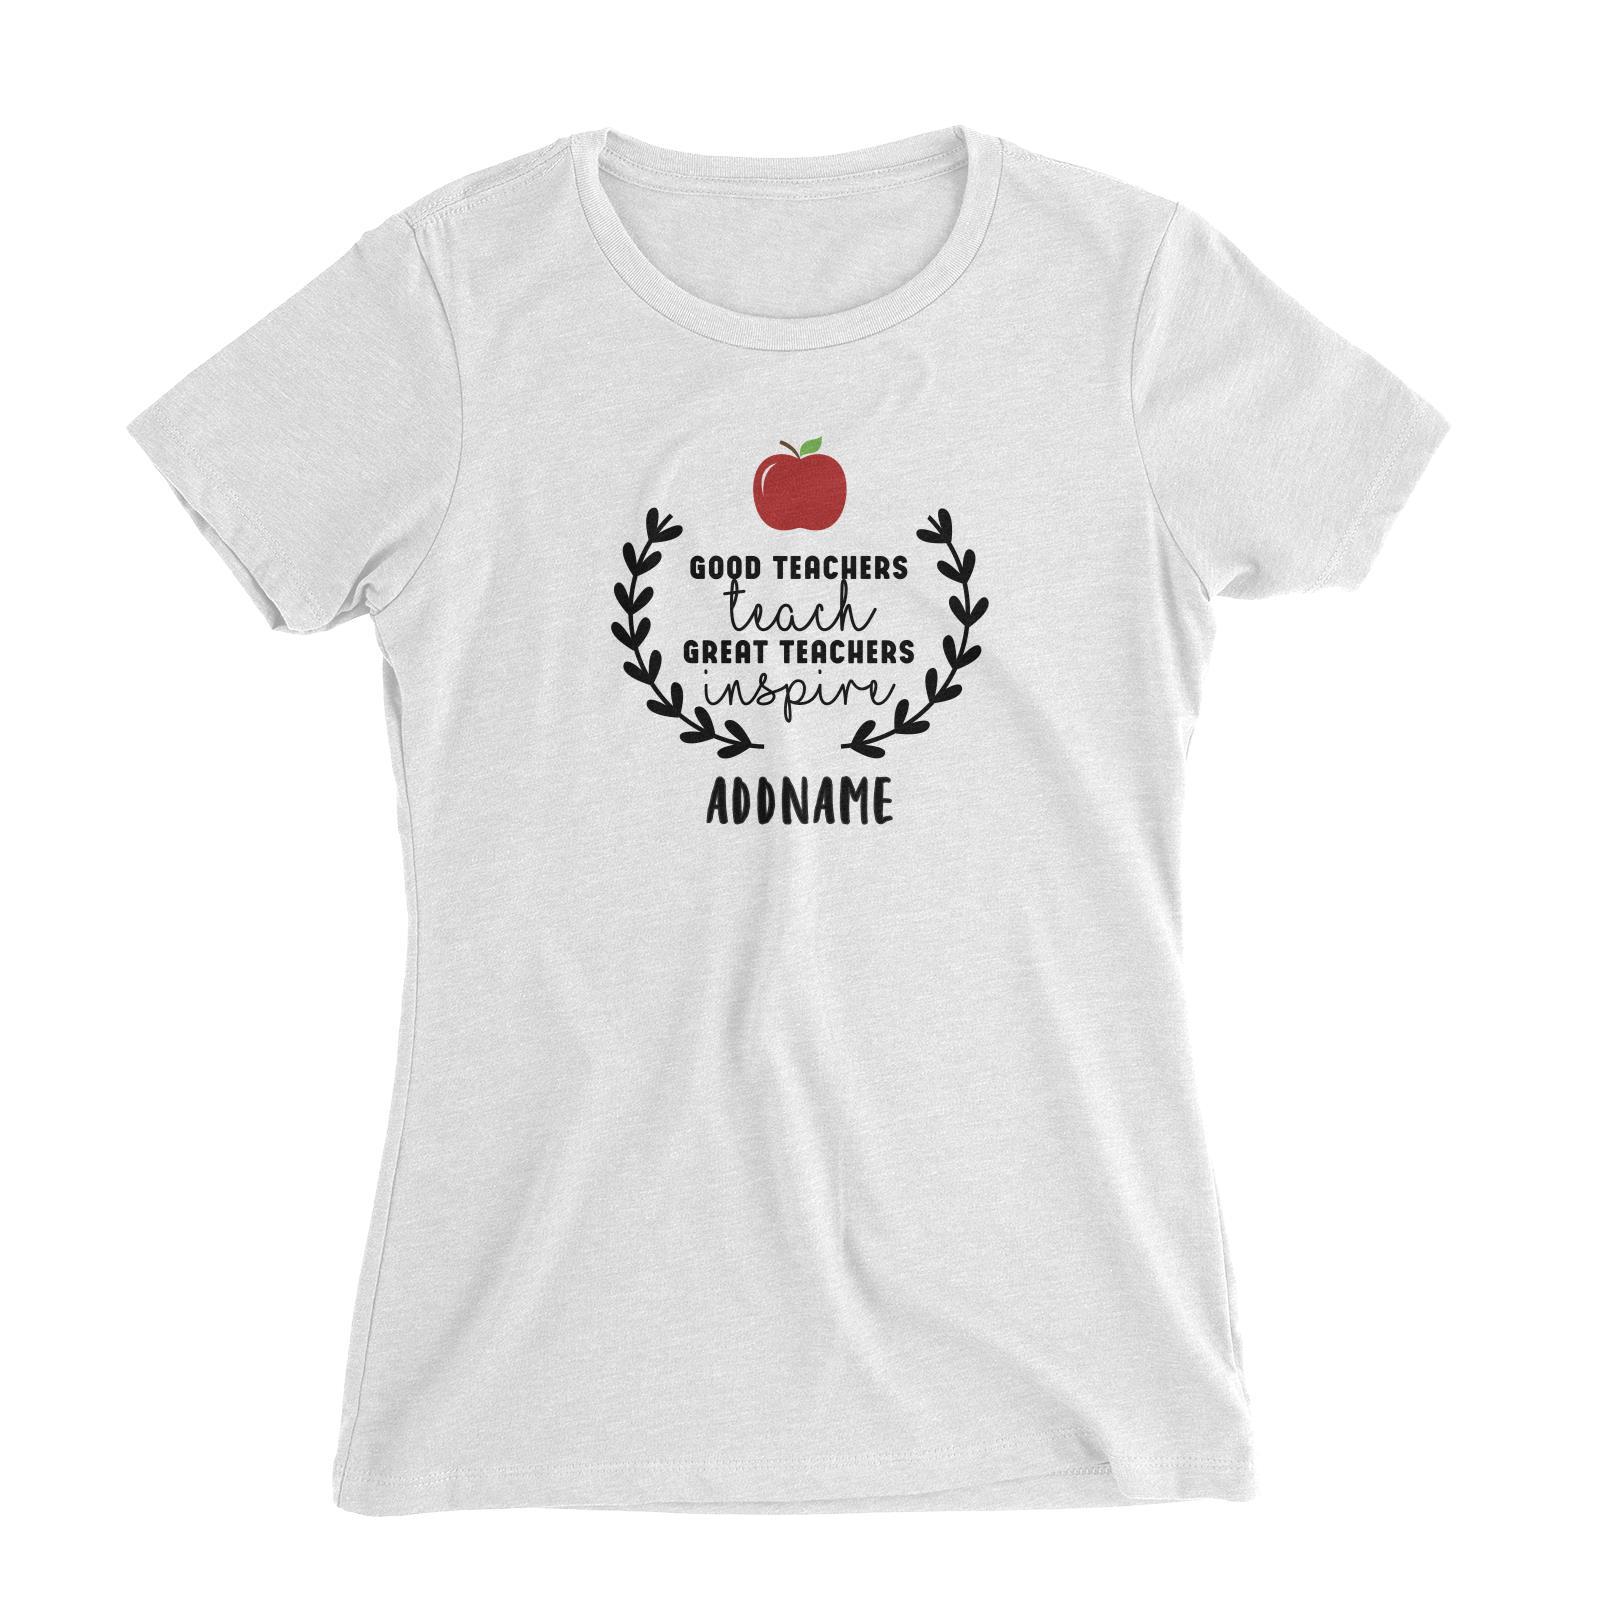 Great Teachers Good Teachers Teach Great Teachers Inspire Addname Women's Slim Fit T-Shirt